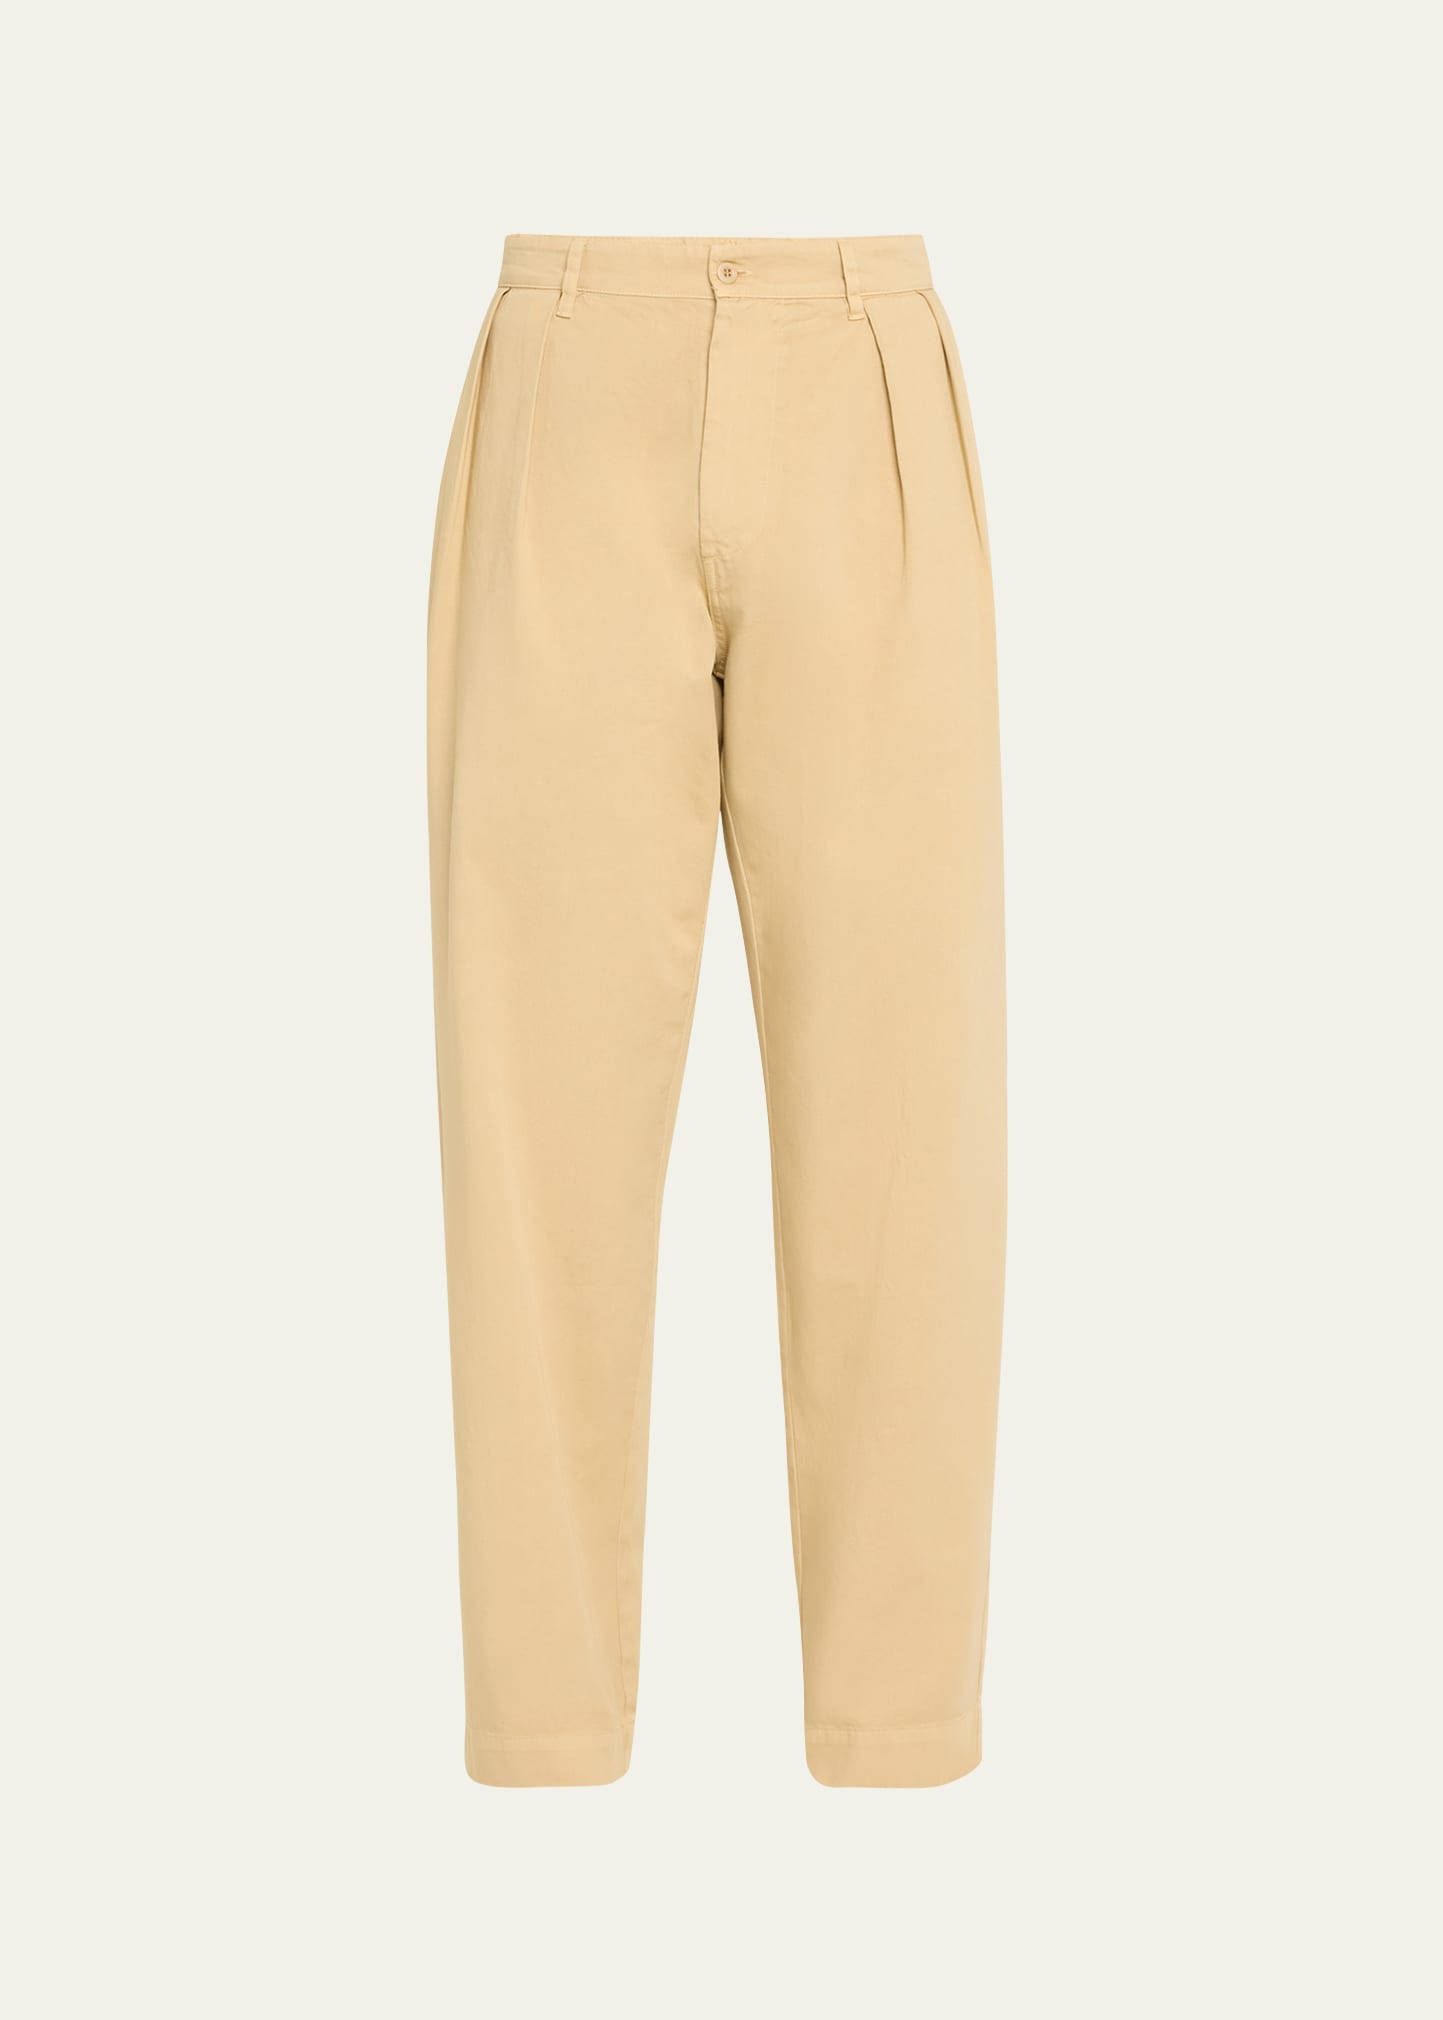 Labo.art Men's Dylan Cotton Double-pleated Pants In Majove